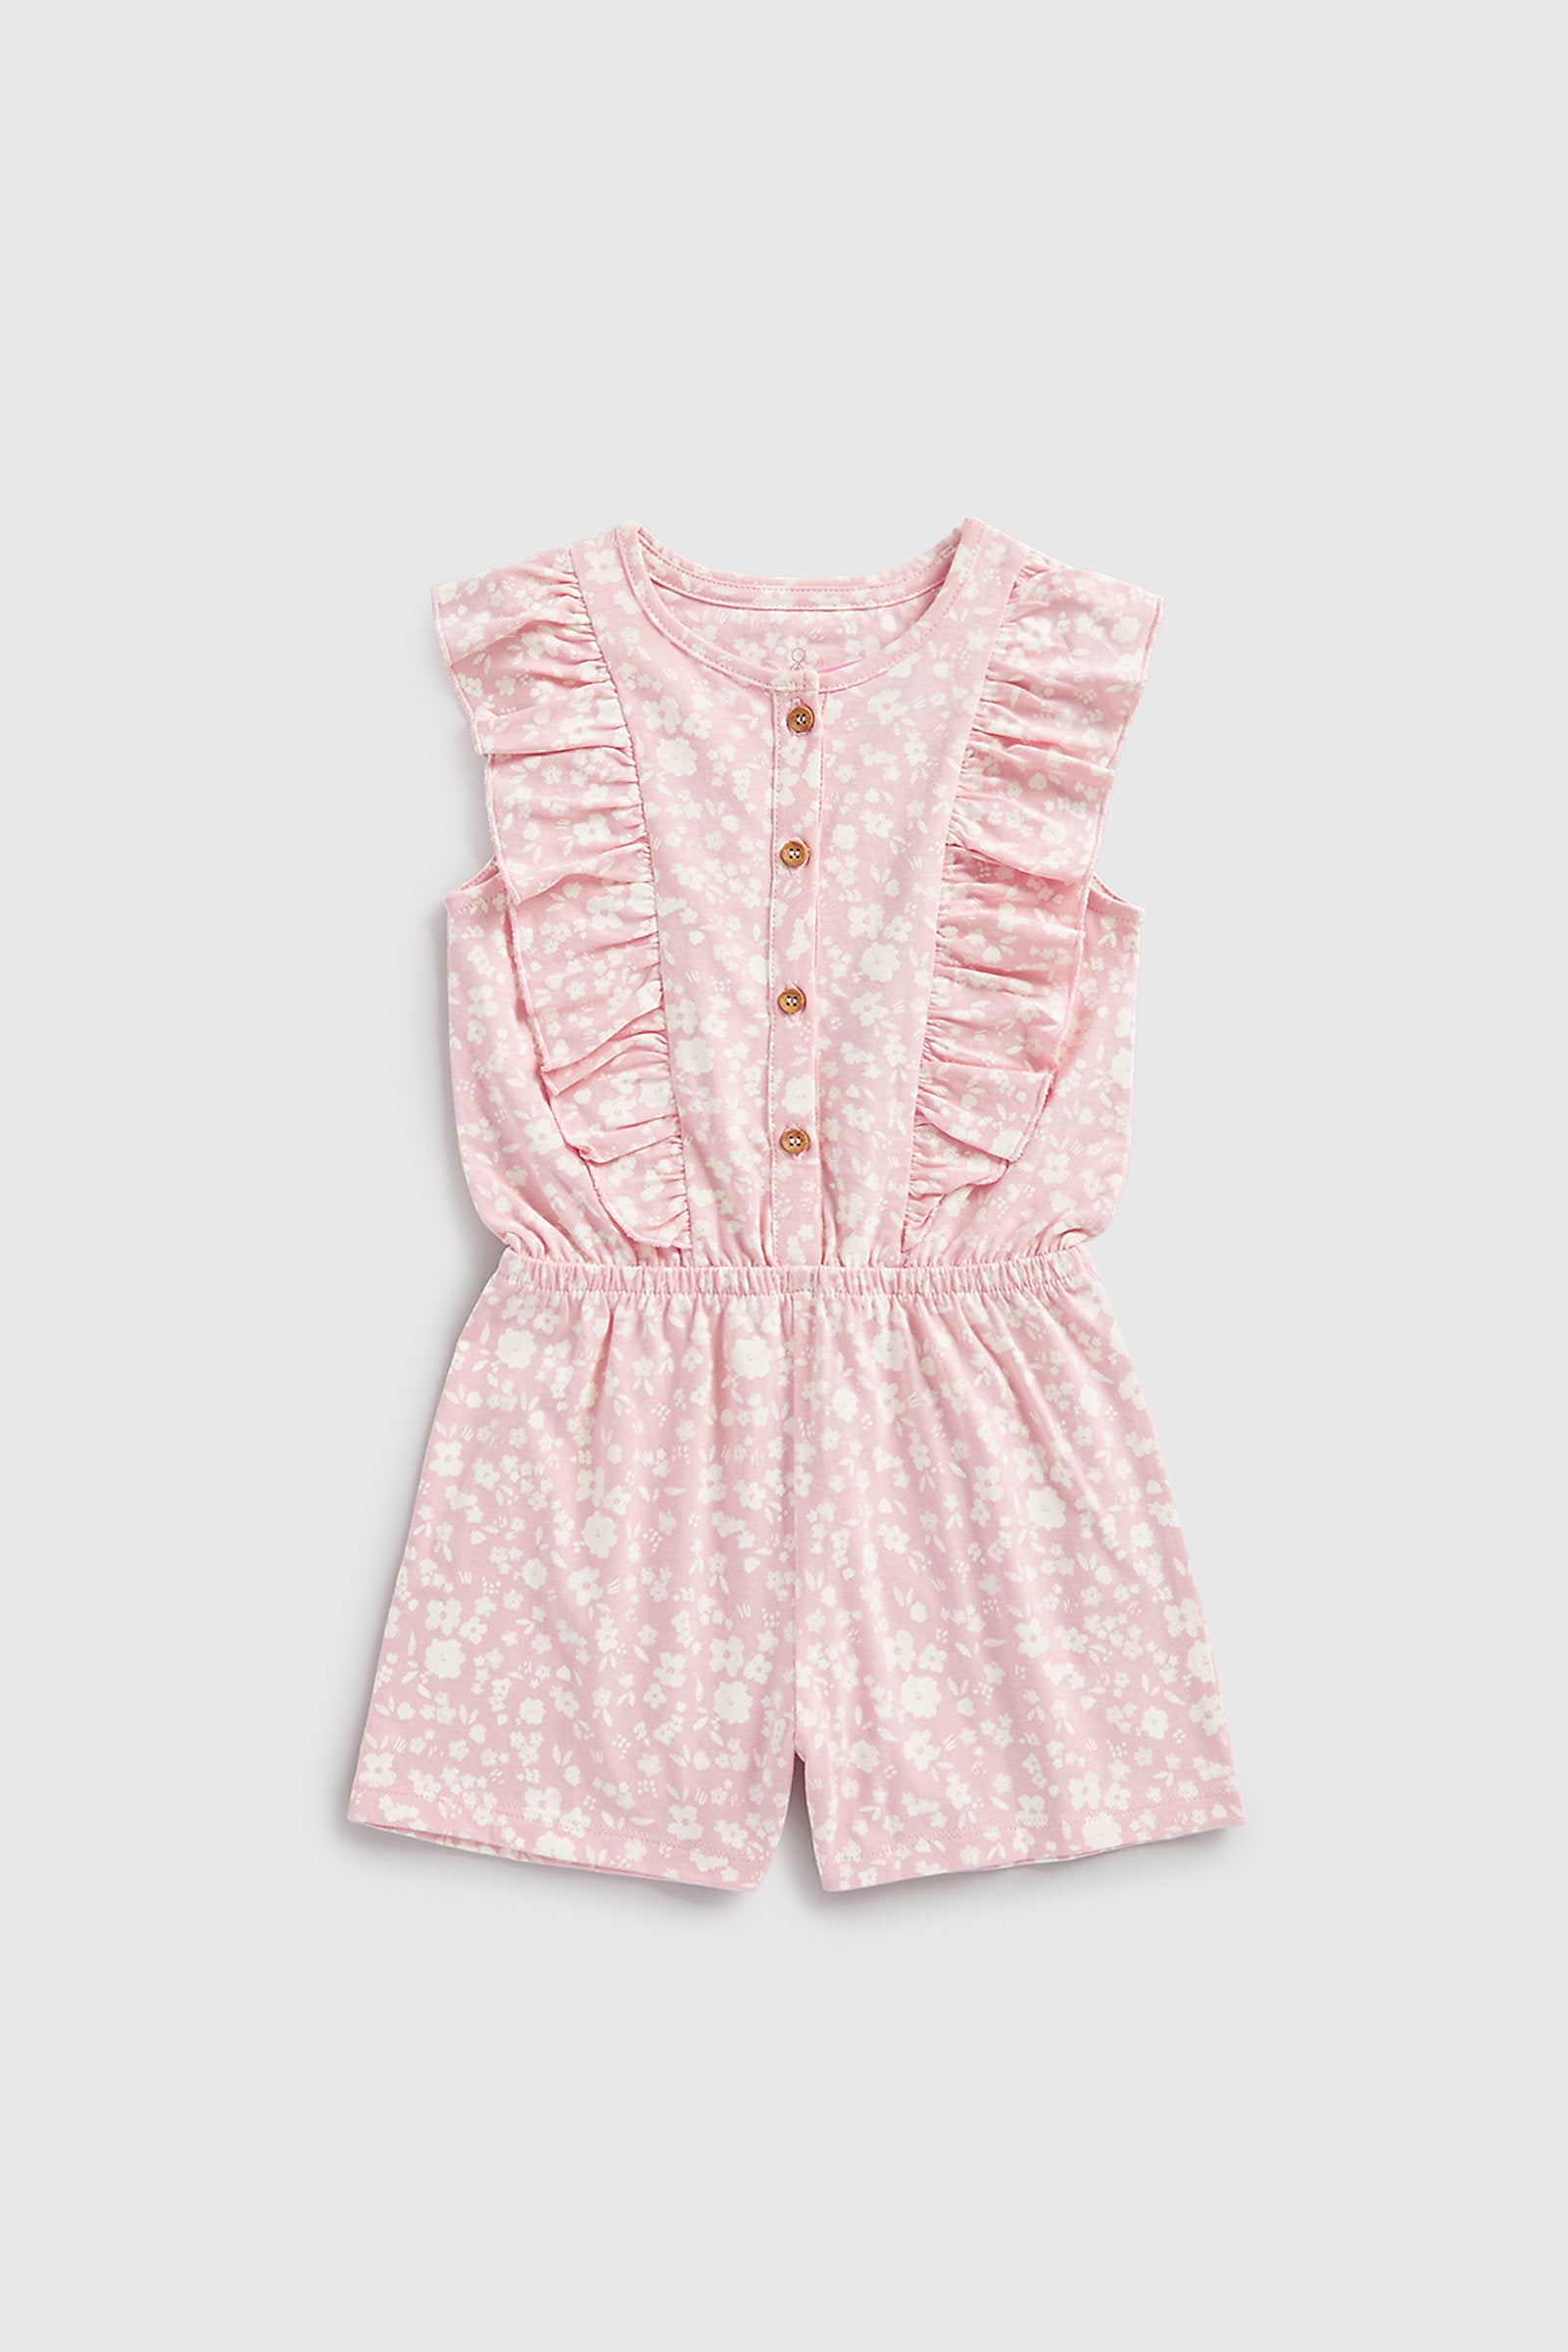 Mothercare Pink Floral Playsuit